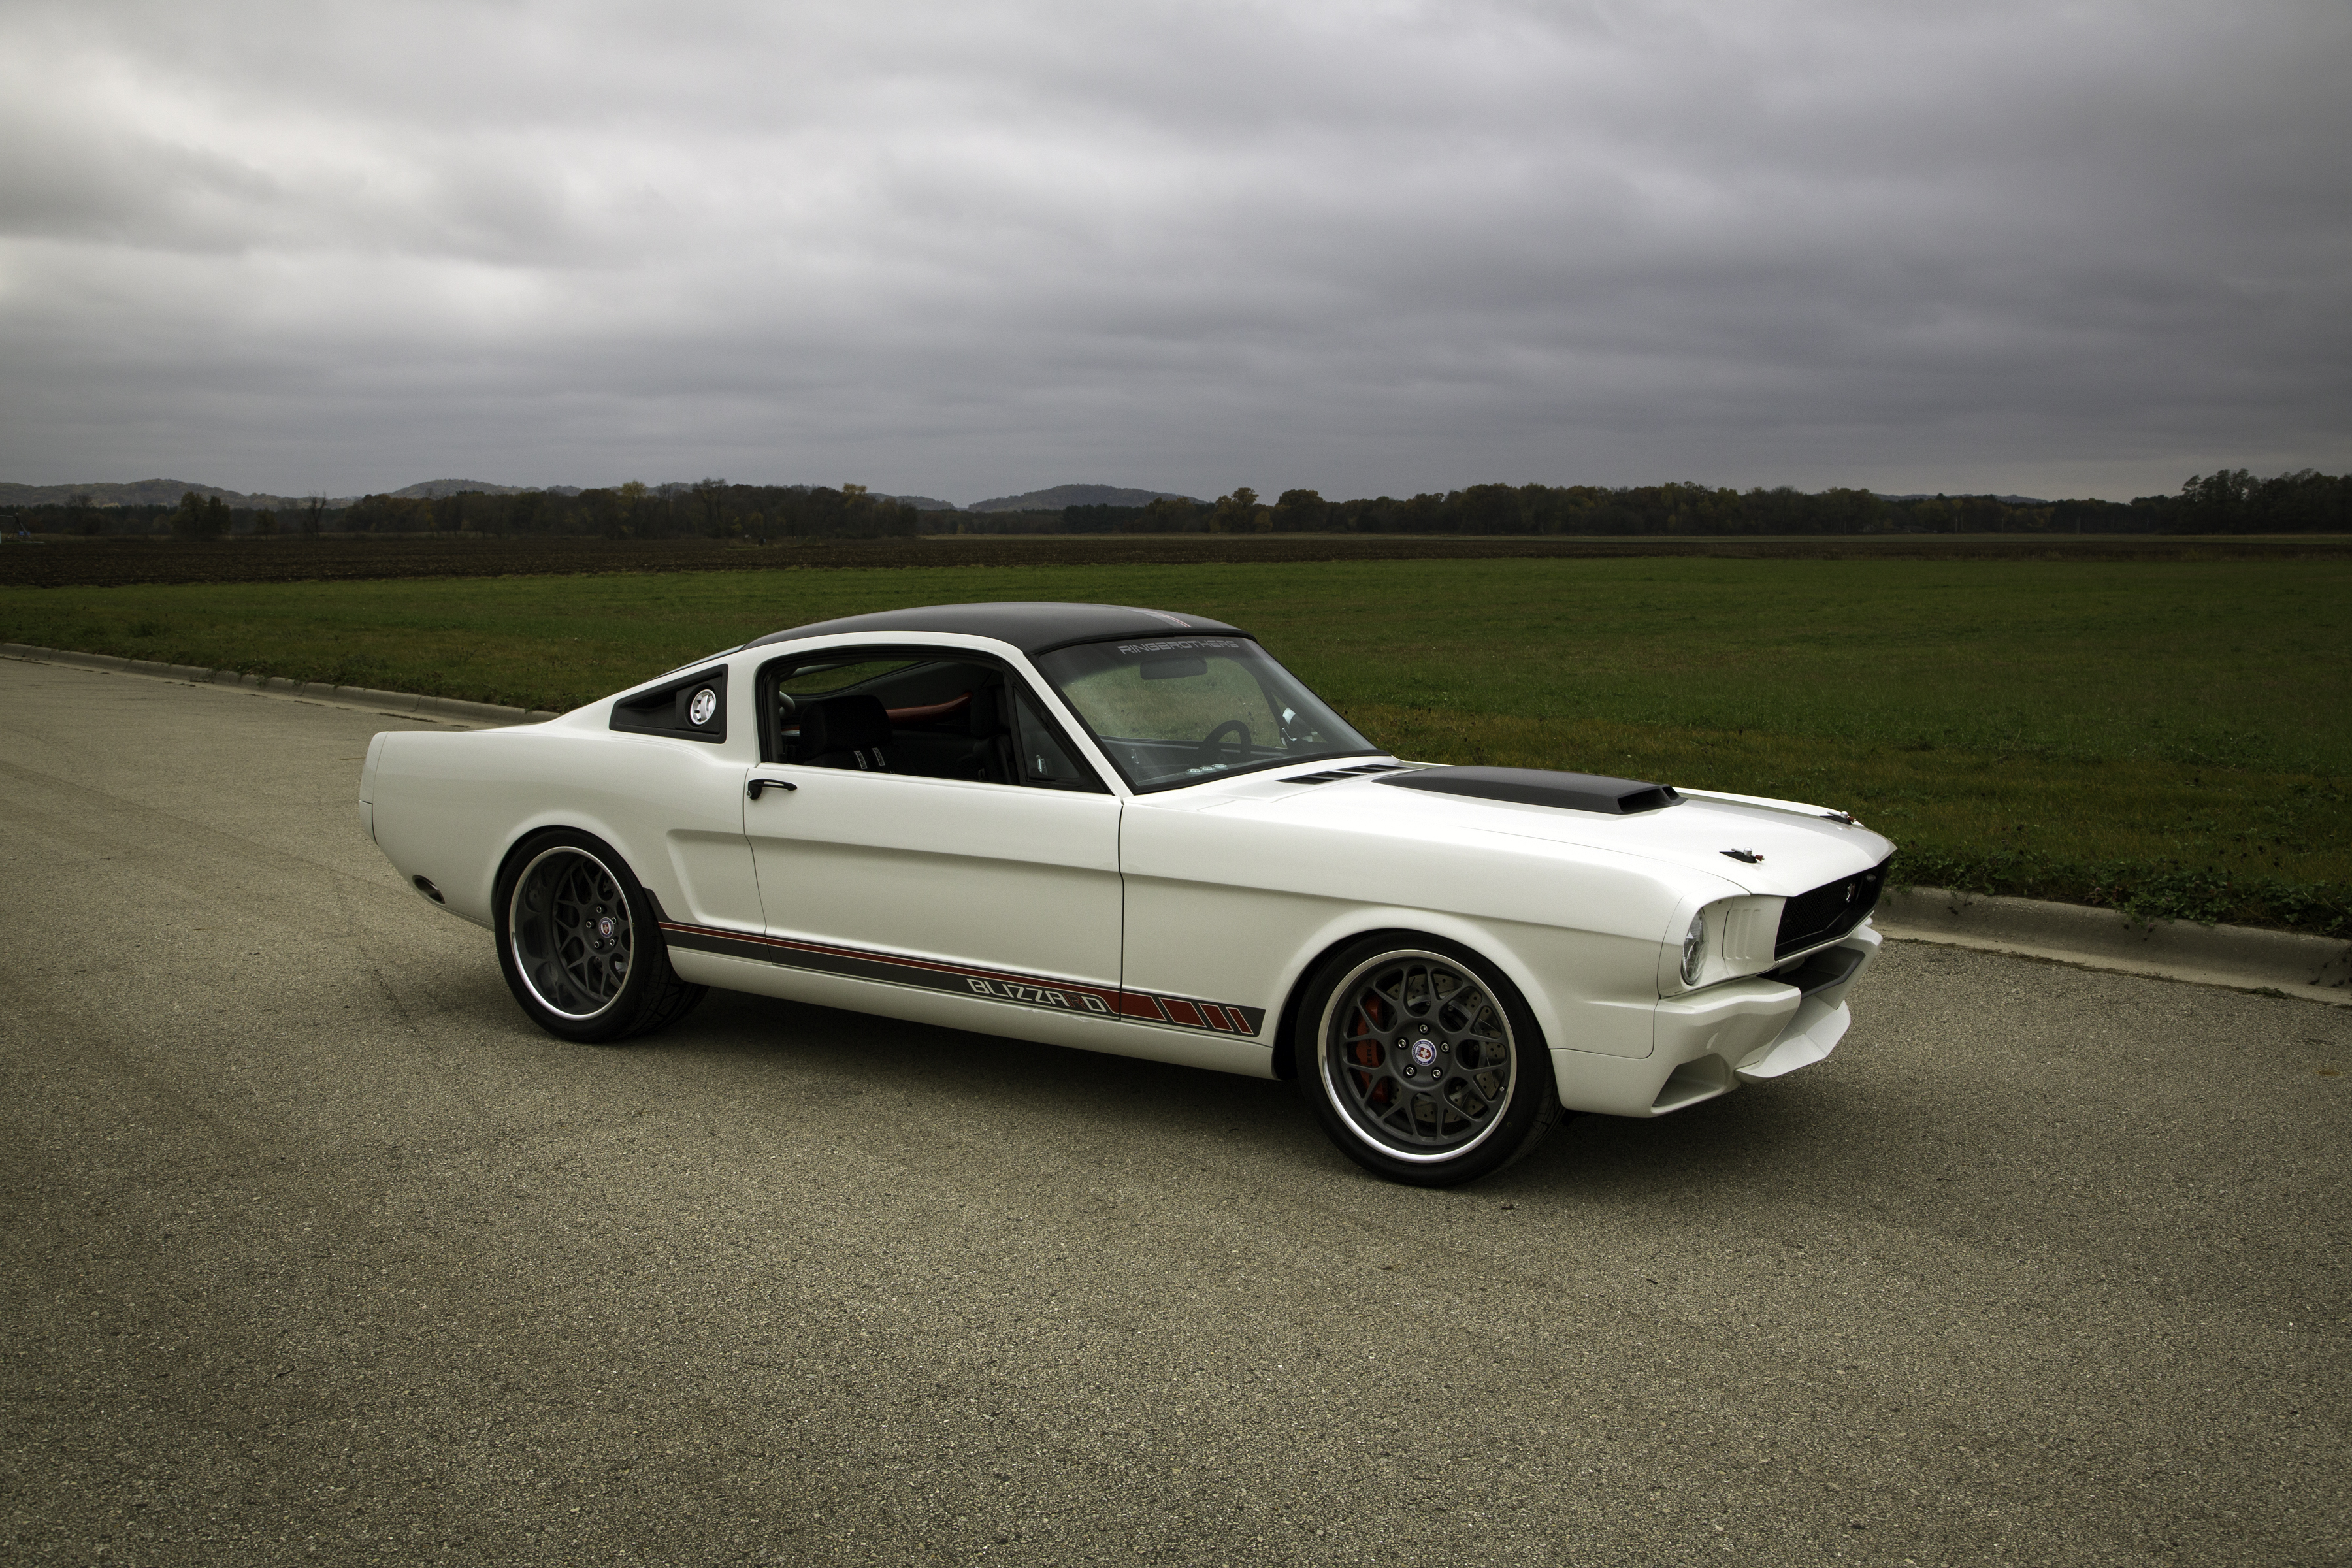 Ringbrothers Ford Mustang Blizzard Wallpapers